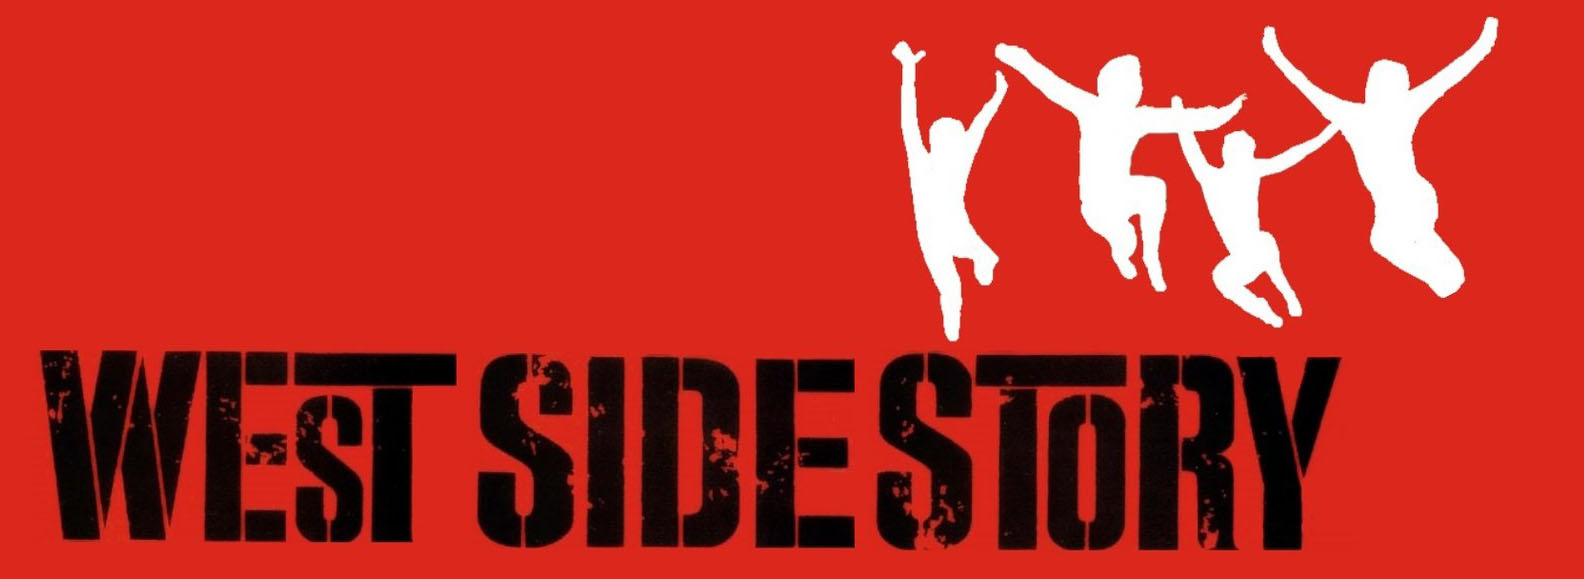 West Side Story Backgrounds on Wallpapers Vista